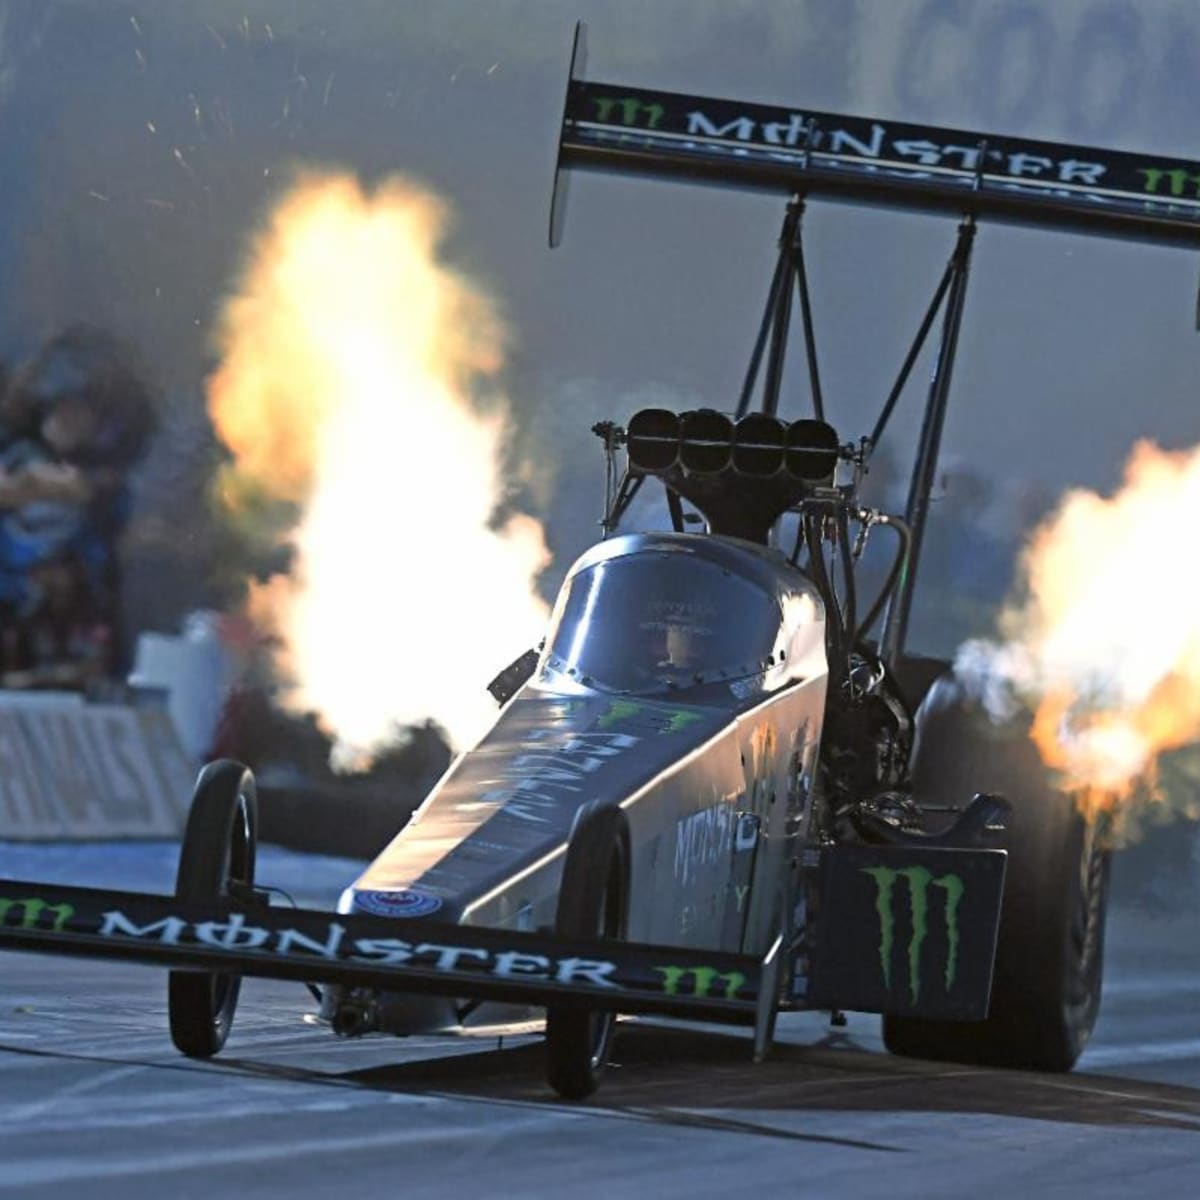 NHRA: Brittany Force re-sets national Top Fuel speed record (see video); is championship - Auto Racing Digest